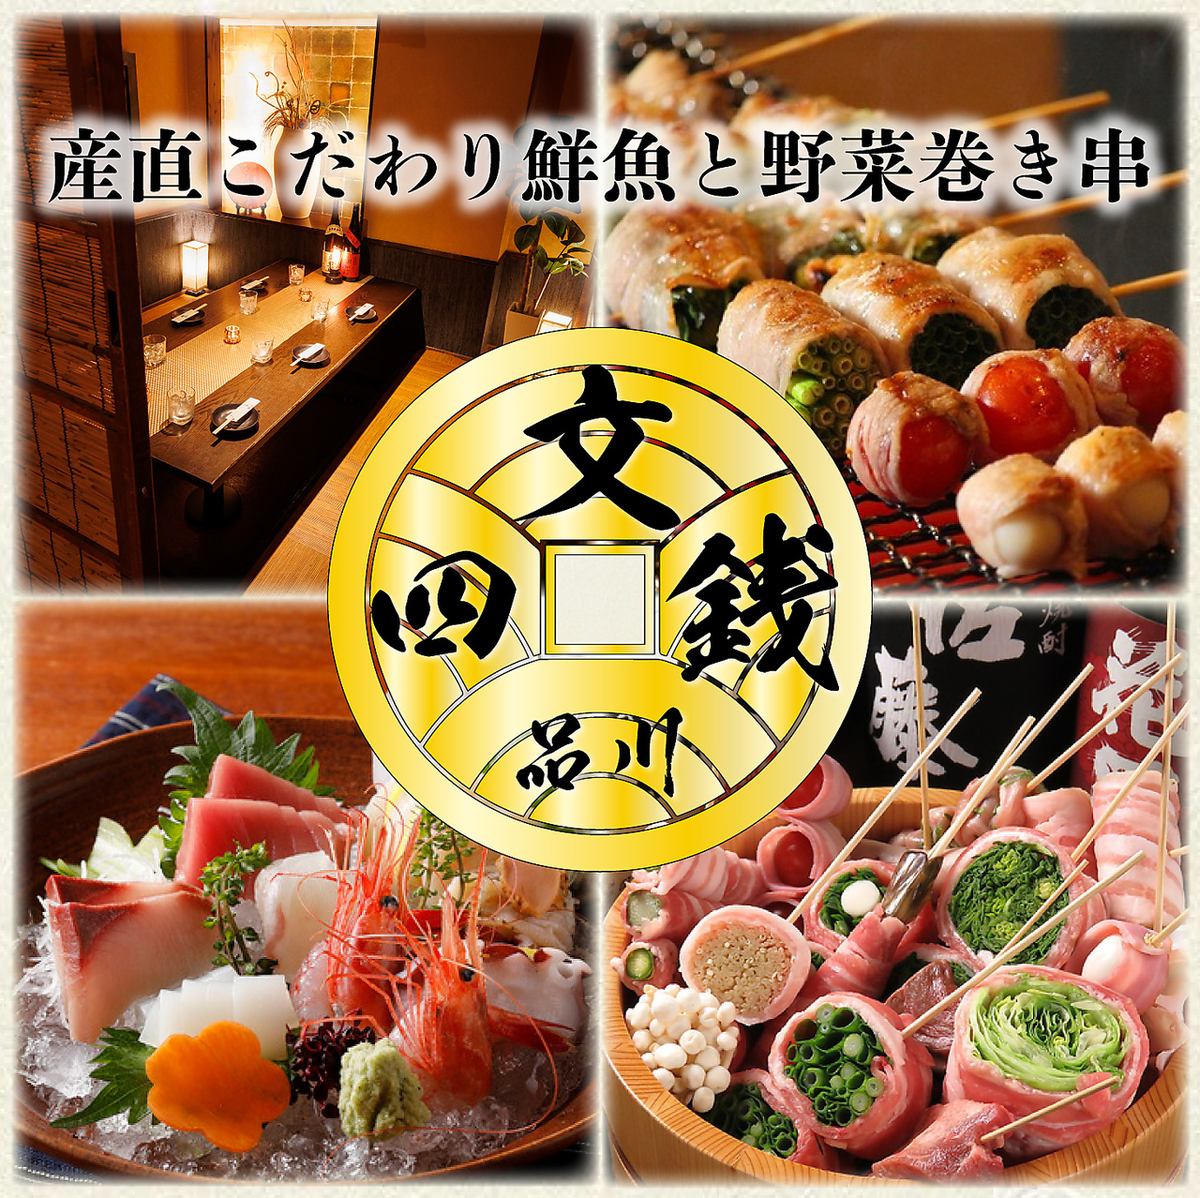 ■Shimonsen Shinagawa store ■Banquets/entertainment/online reservations accepted 24 hours a day